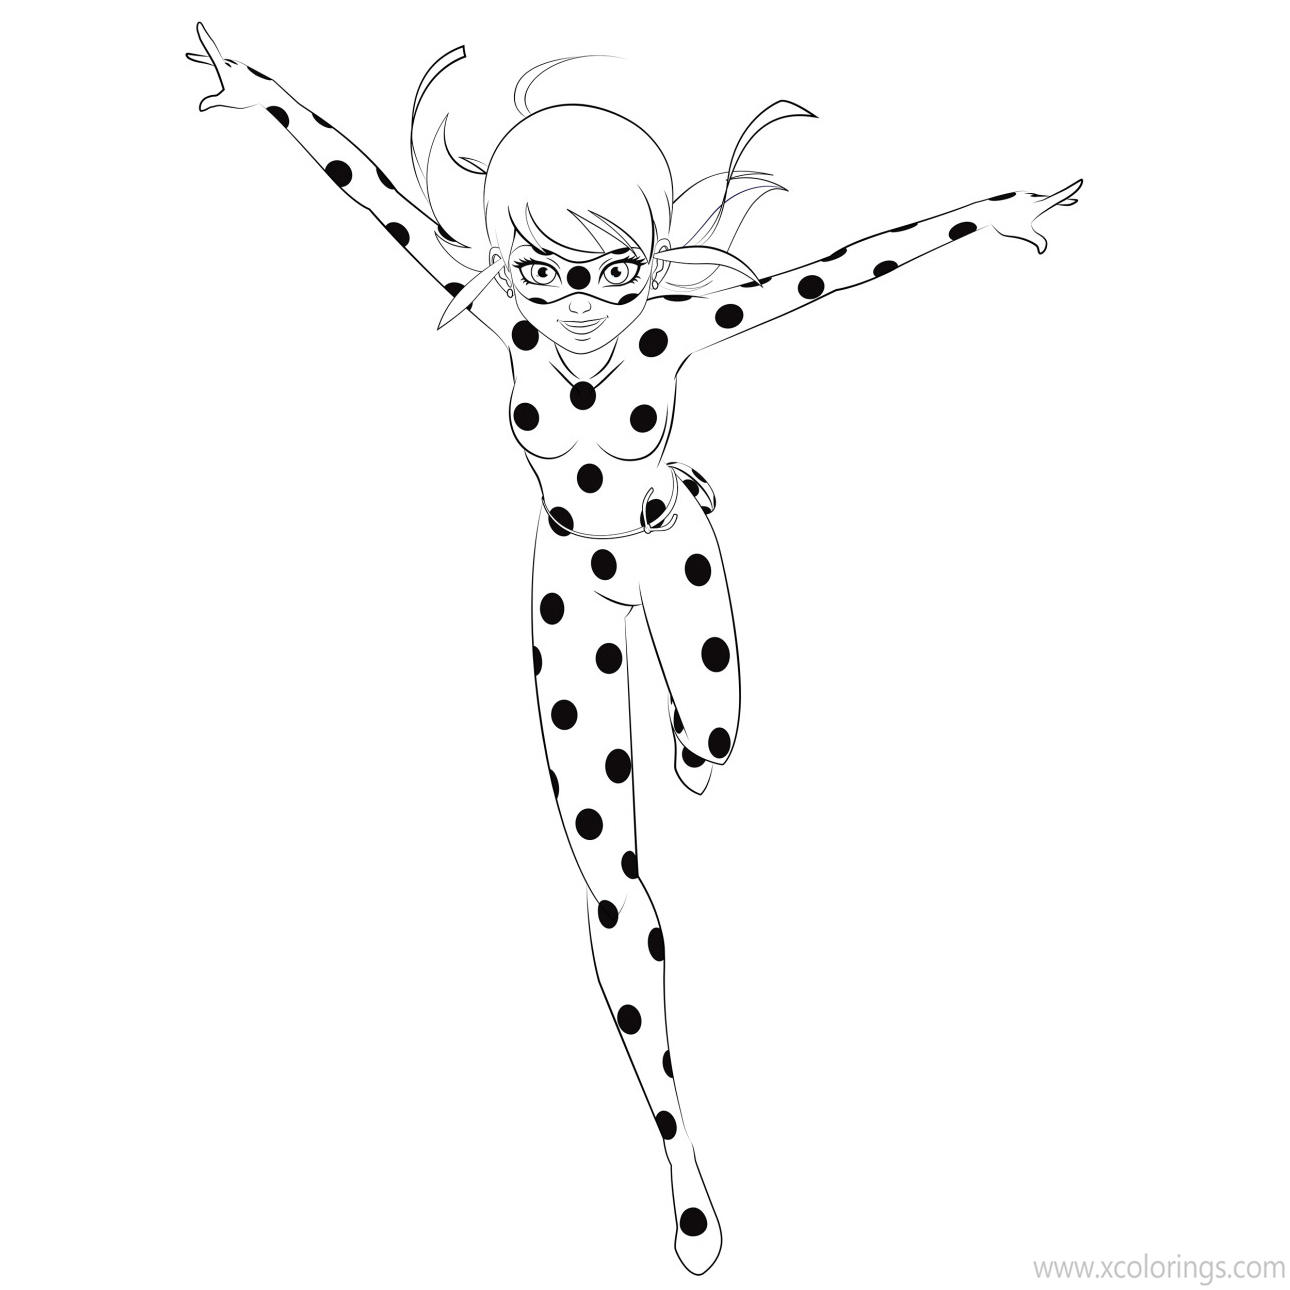 Free Miraculous Ladybug Coloring Pages Marinette is Running printable